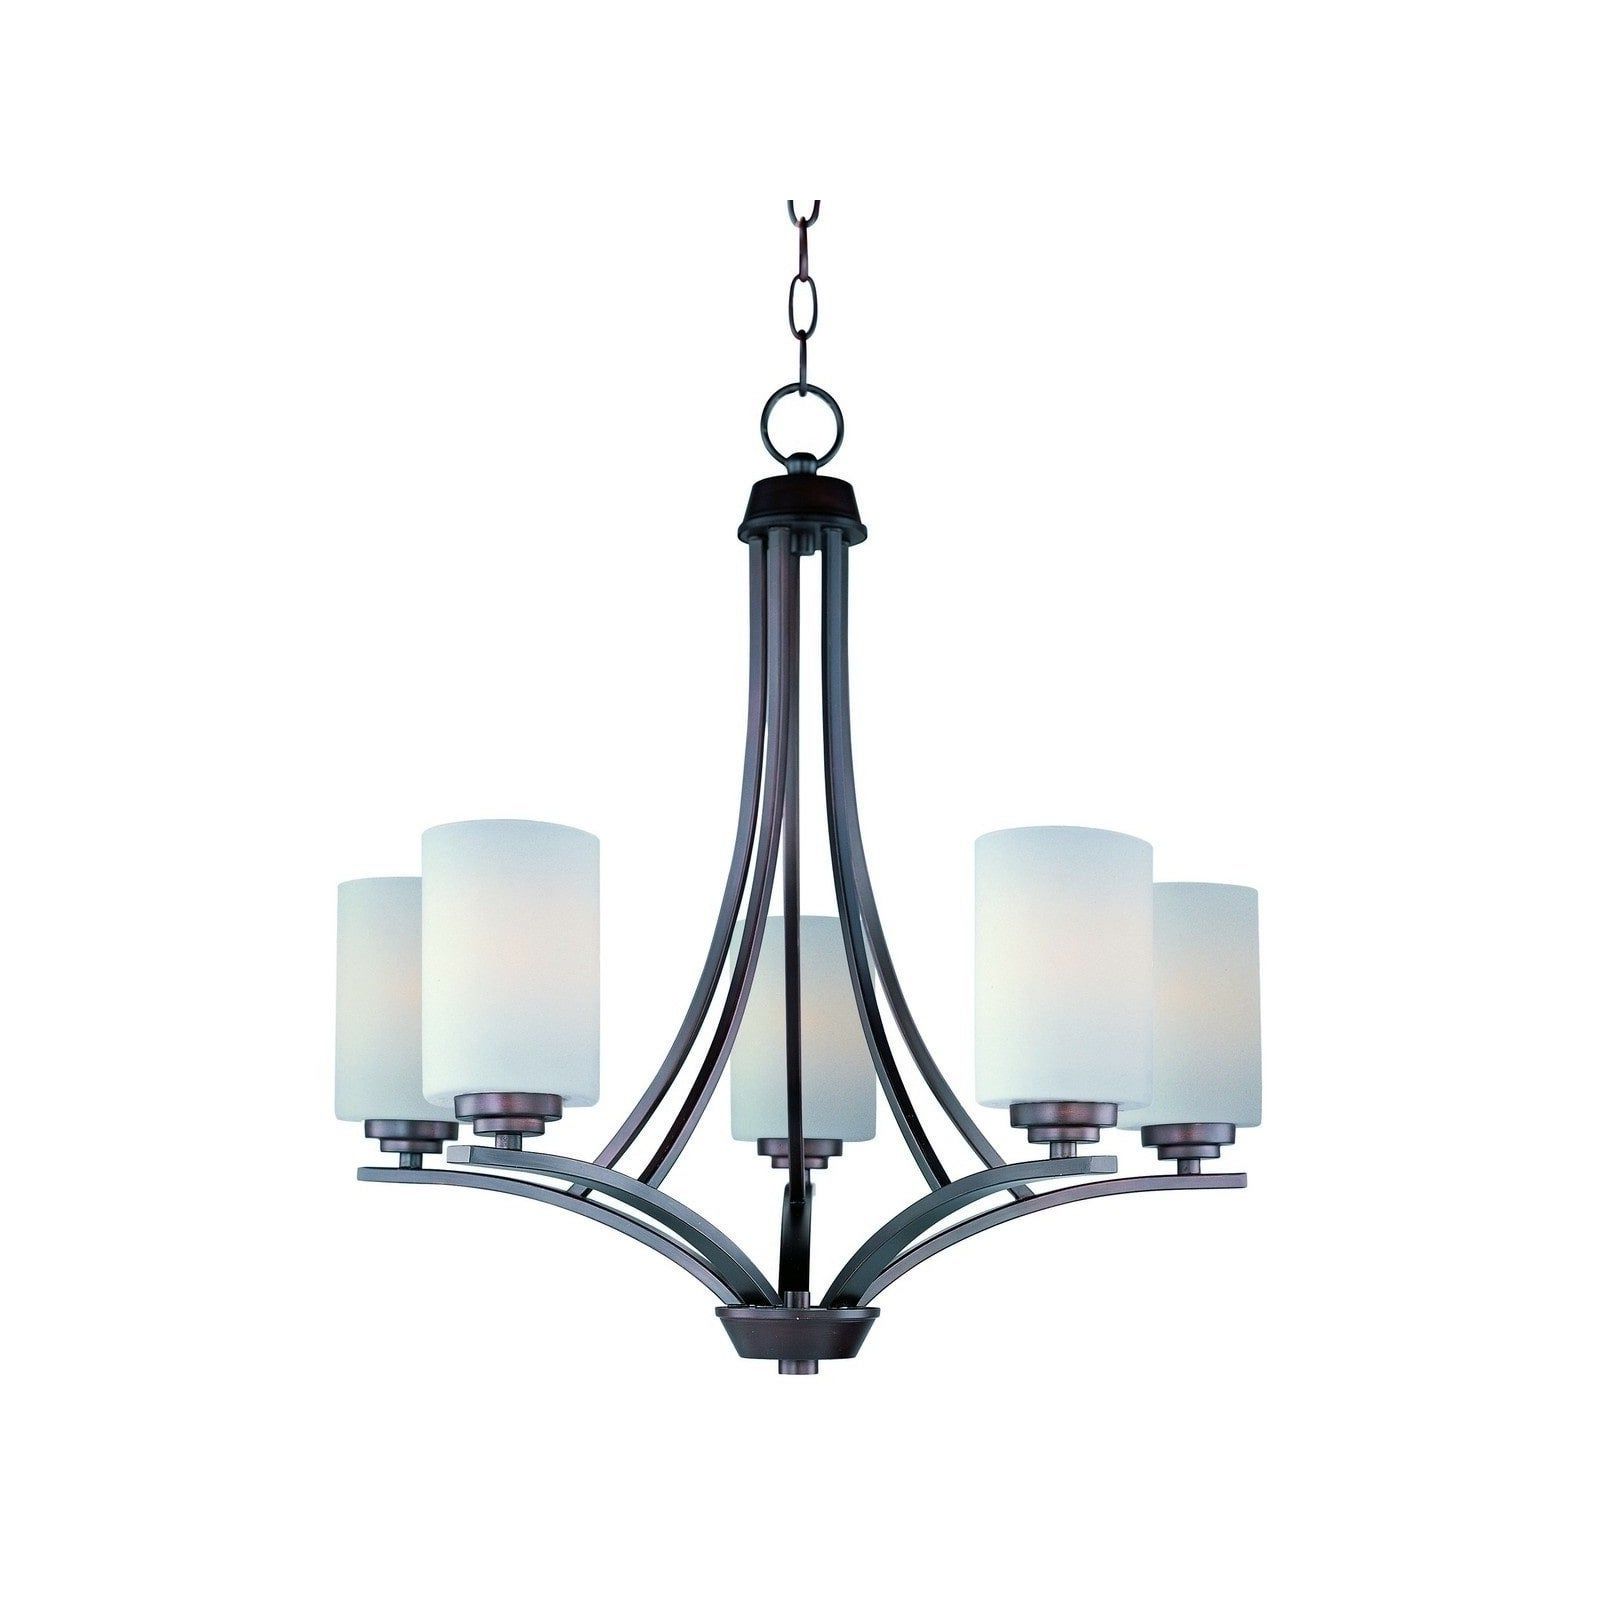 Shop Maxim Satin White Shade 5 Light Bronze Deven Single Intended For Newest Satin Nickel Five Light Single Tier Chandeliers (View 4 of 15)